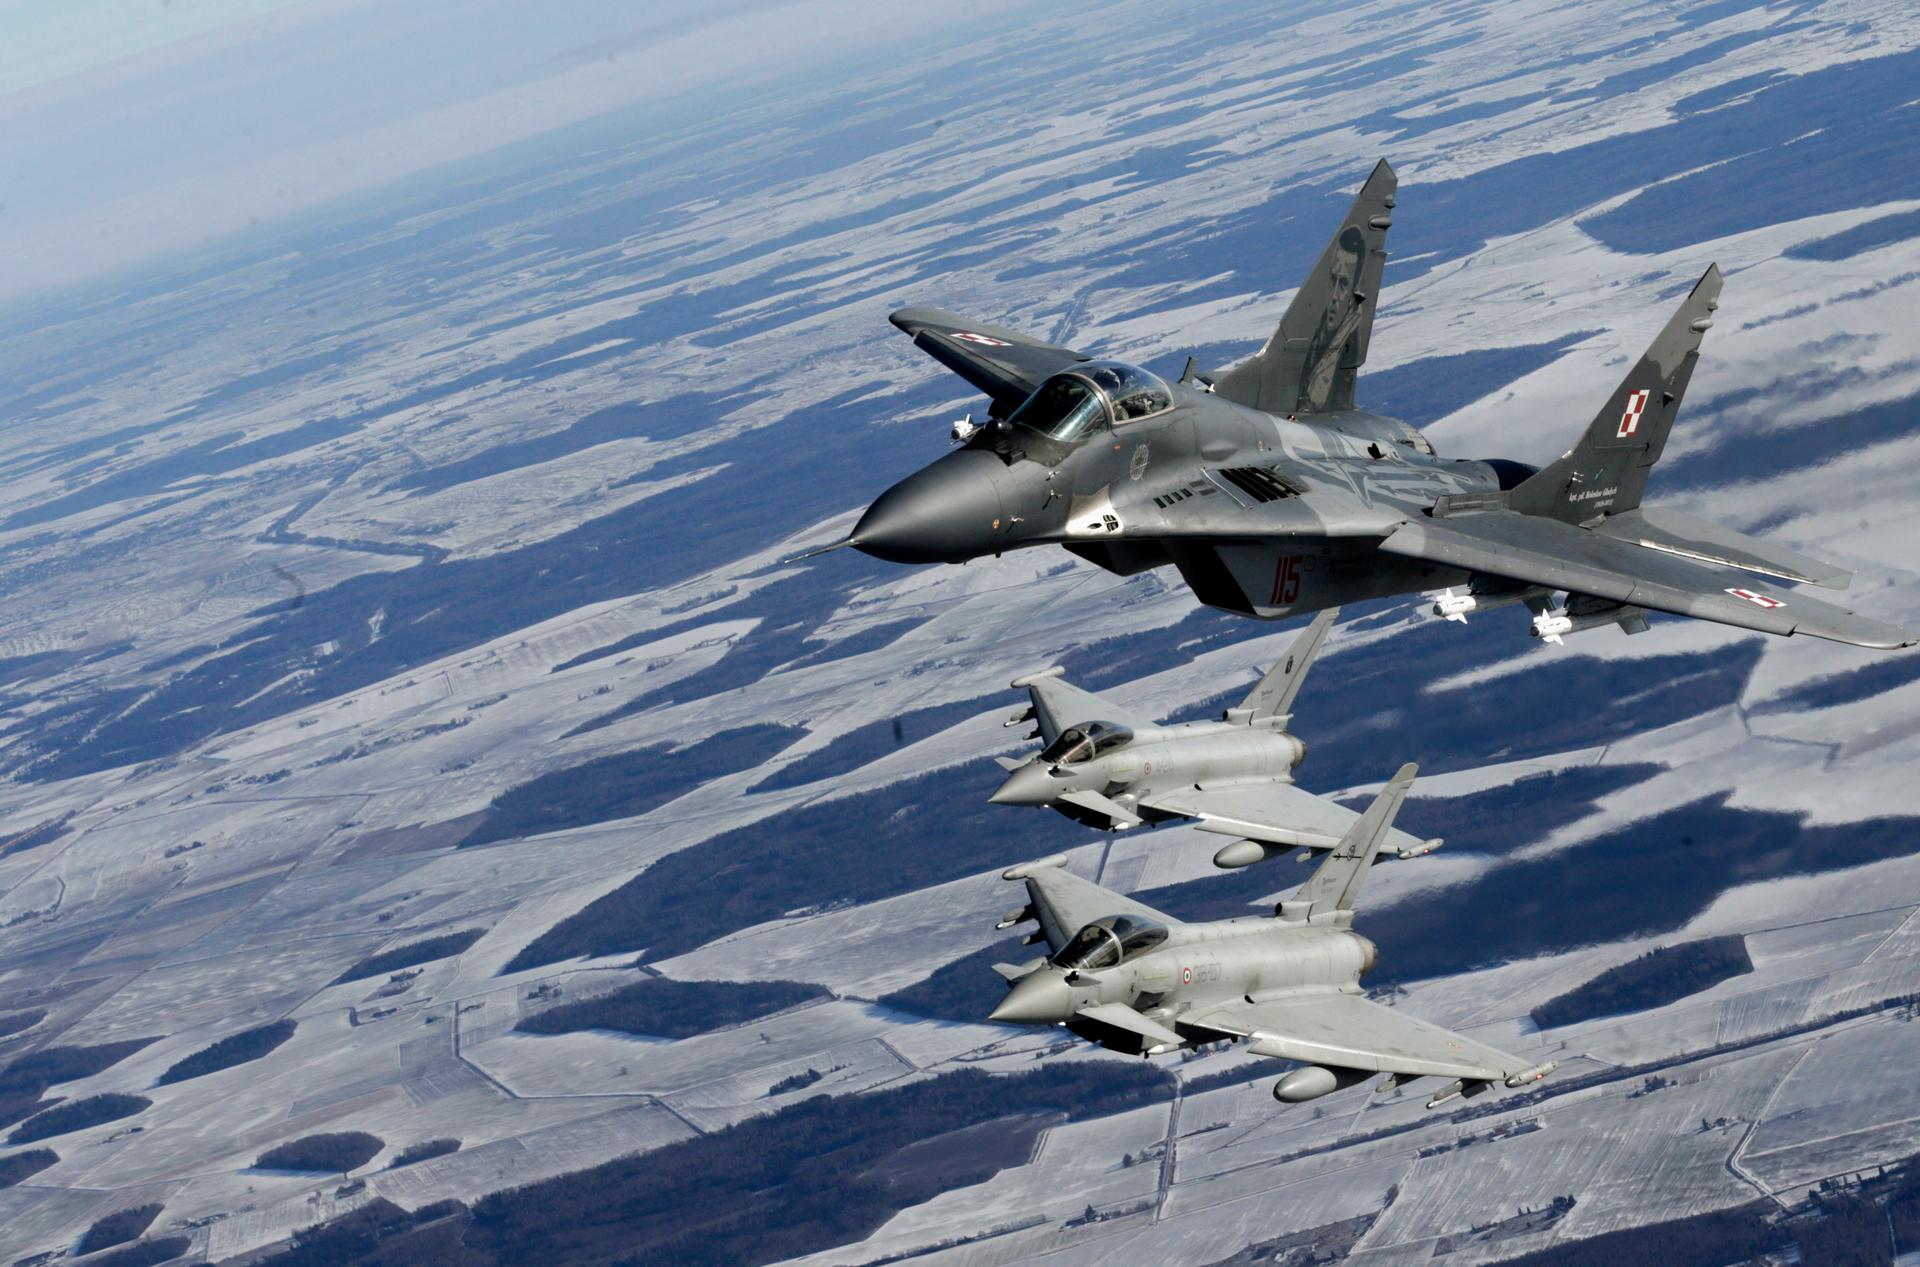 A Polish Air Force MIG-29 fighter and Italian Air Force Eurofighter Typhoon fighters participate during a NATO air policing mission patrol over the Baltics on February 10, 2015.